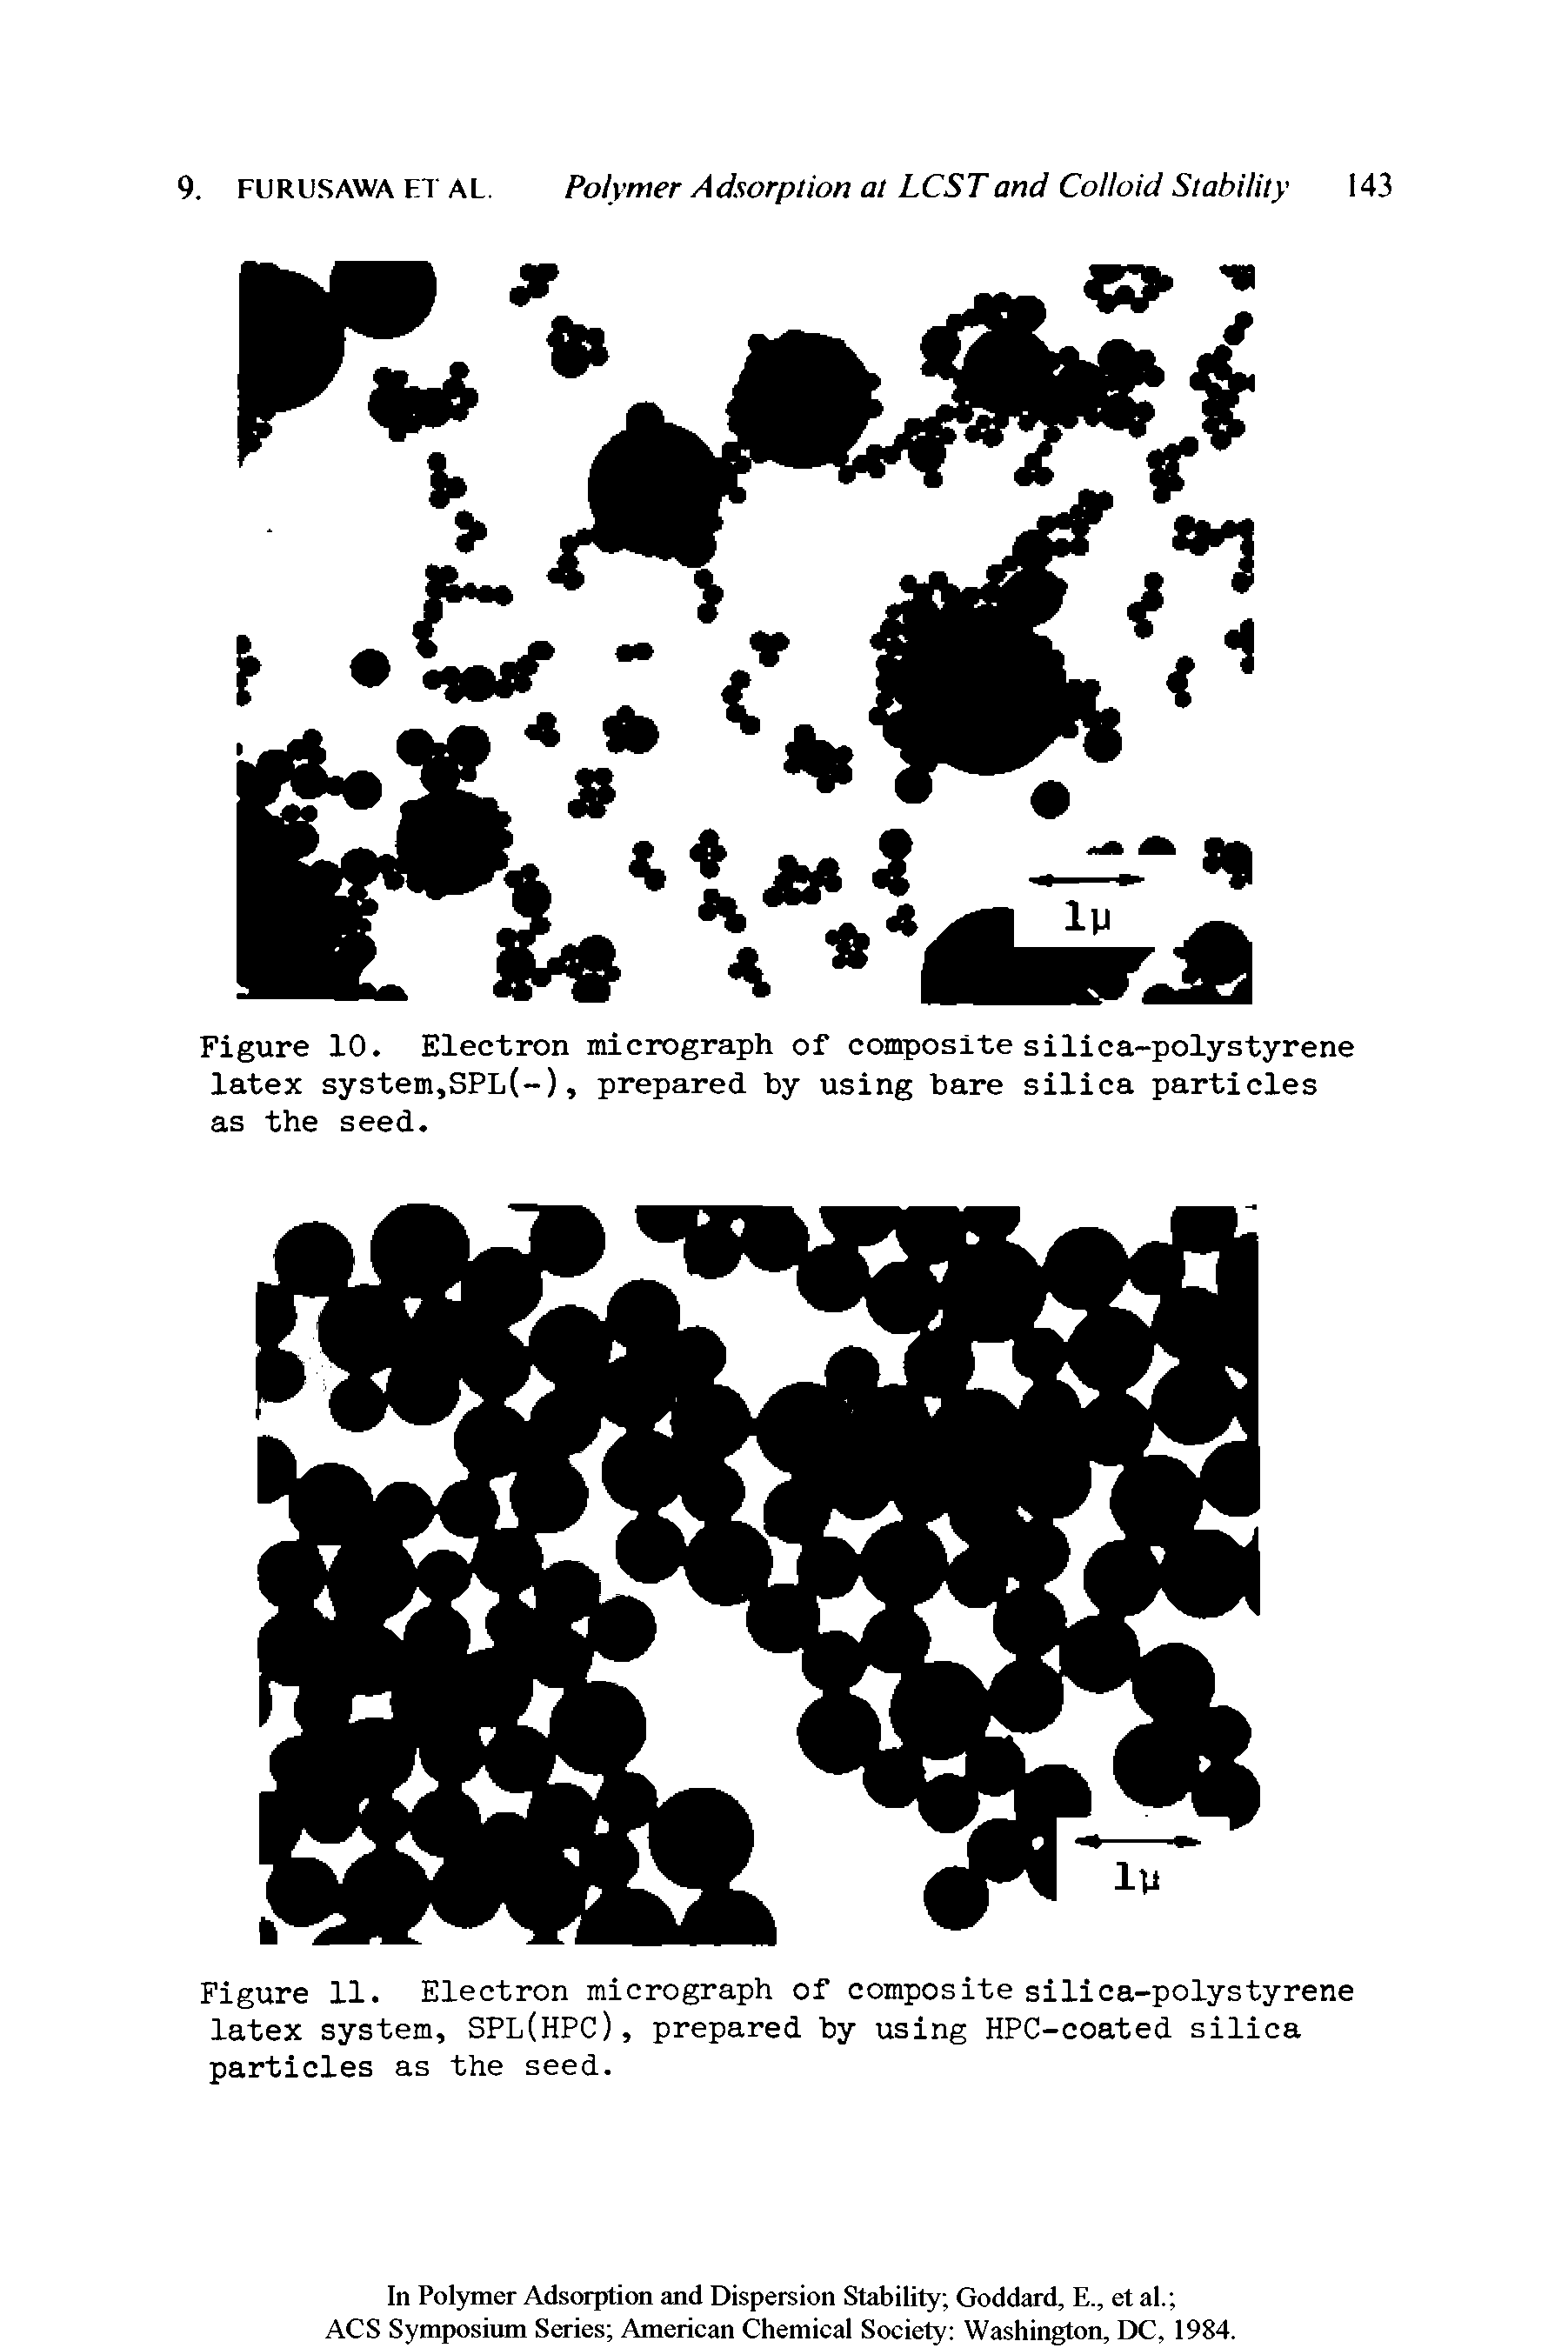 Figure 11. Electron micrograph of composite silica-polystyrene latex system, SPL(HPC), prepared by using HPC-coated silica particles as the seed.